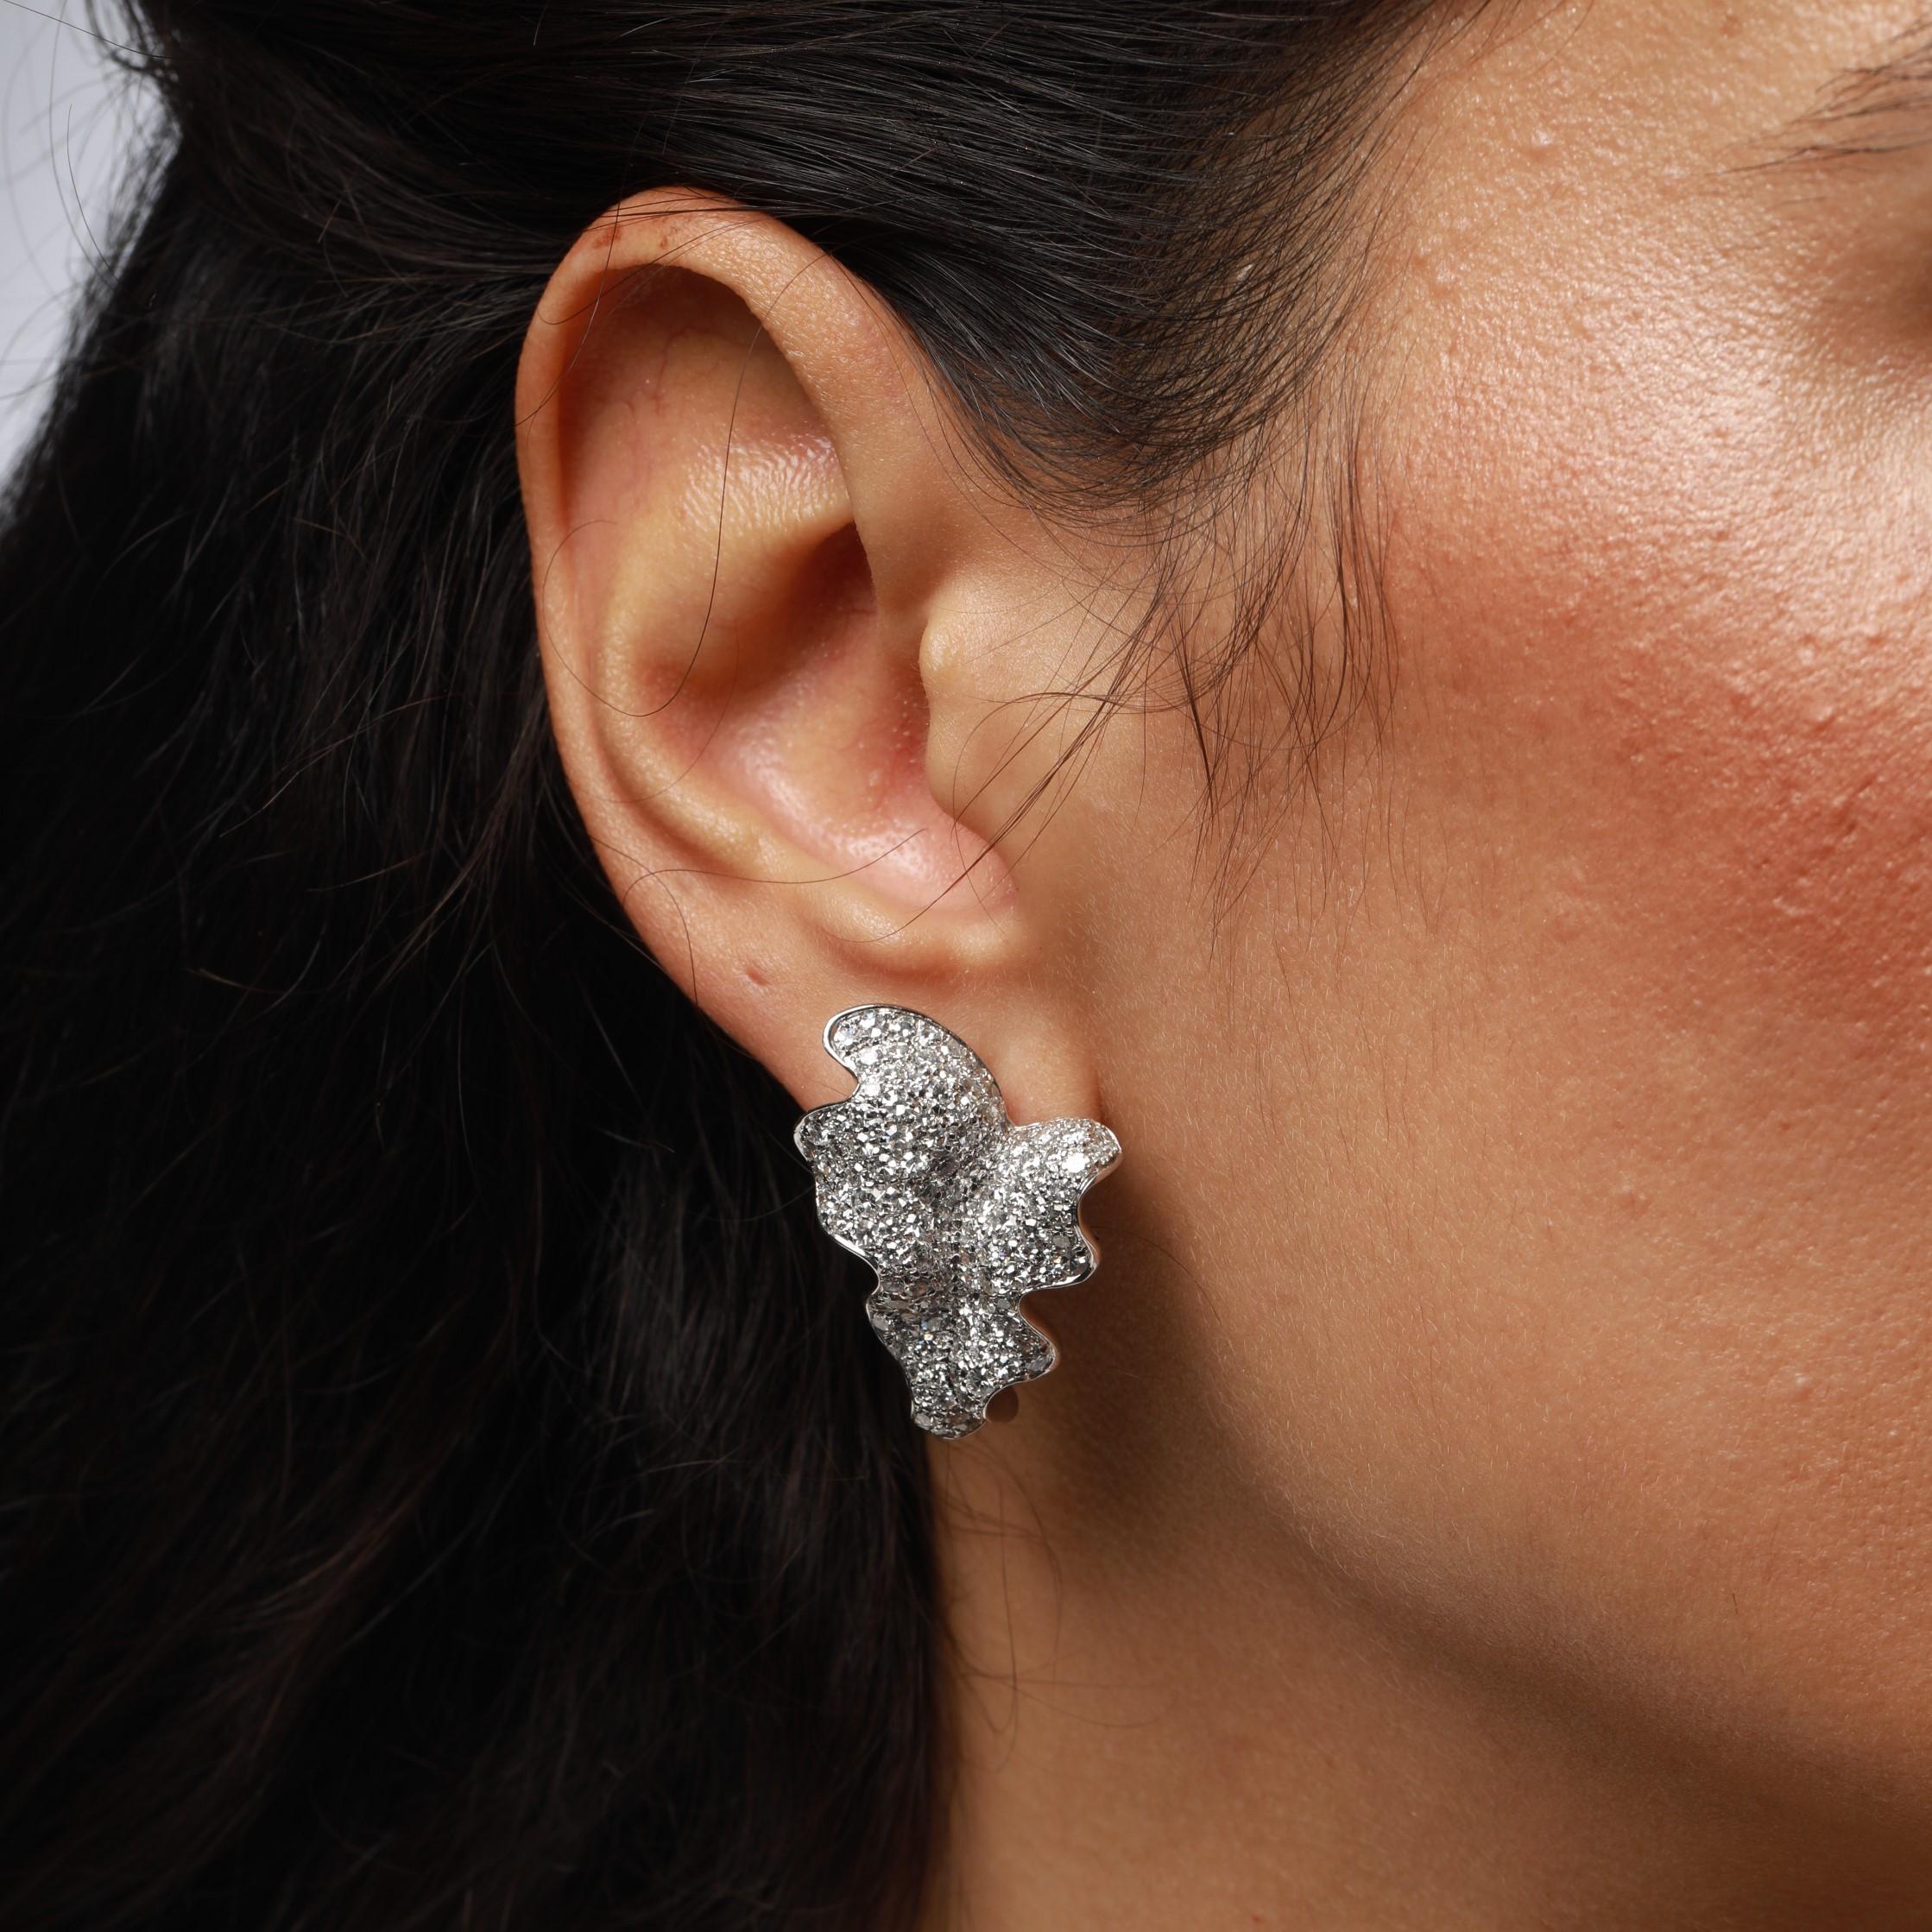 For classic, ultra-wearable white diamonds with a David Morris twist, look to the House’s scintillating Oak Leaf stud earrings. 

These one-of-a-kind diamond earrings have a gently-curved silhouette inspired by the soft, organic forms of the leaves